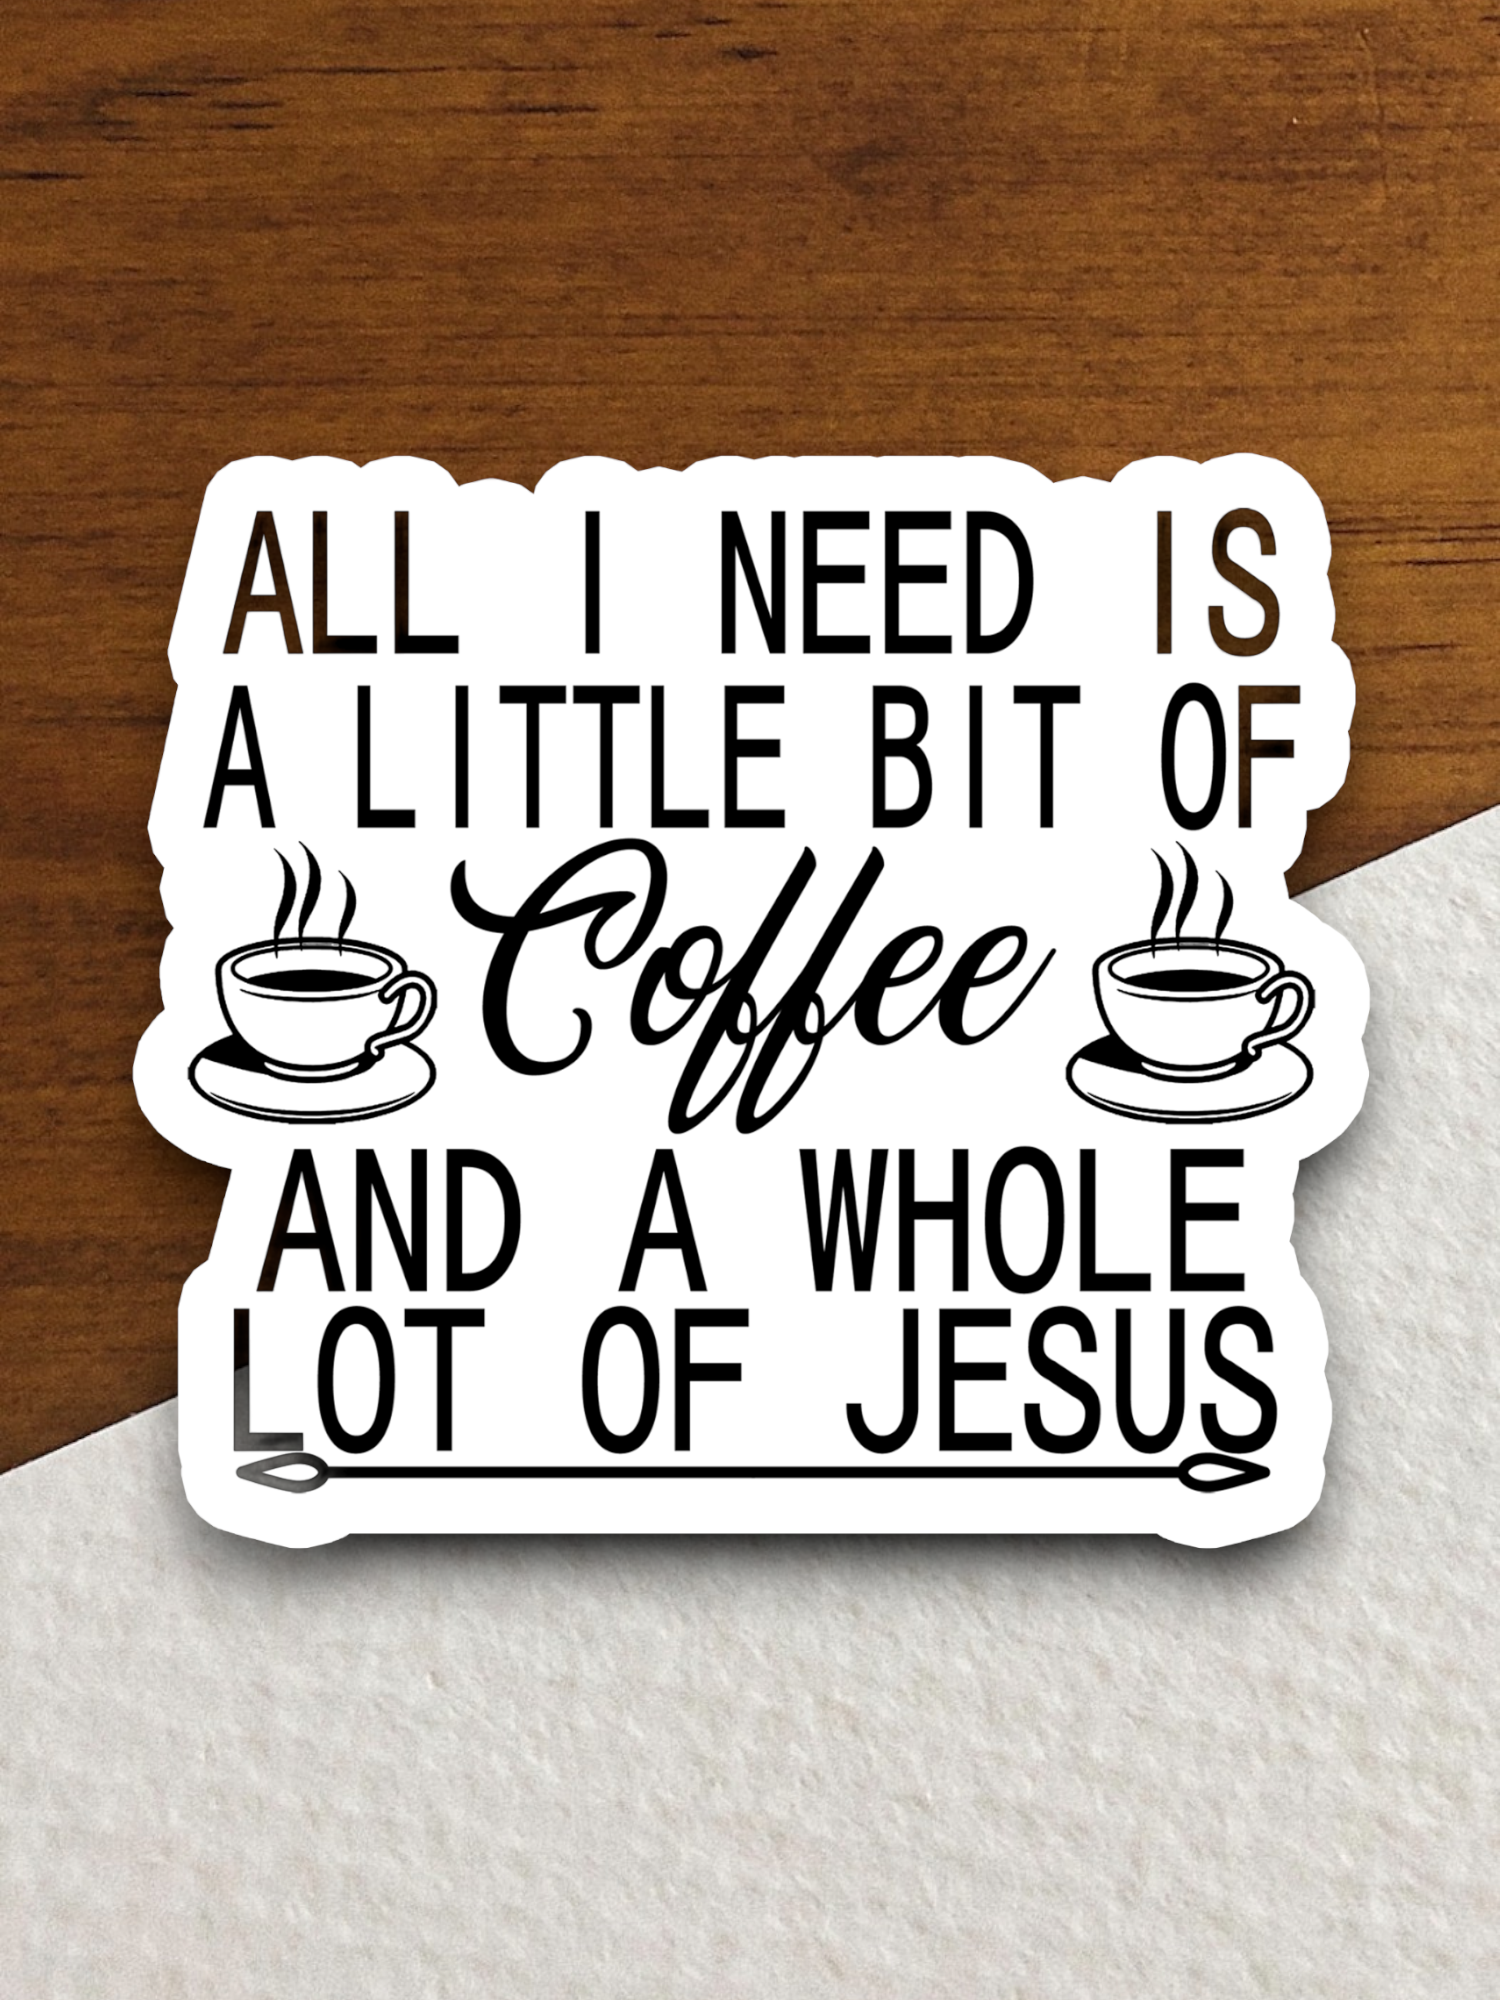 All I Need is a Little Bit of Coffee and a Whole Lot of Jesus - Coffee Sticker